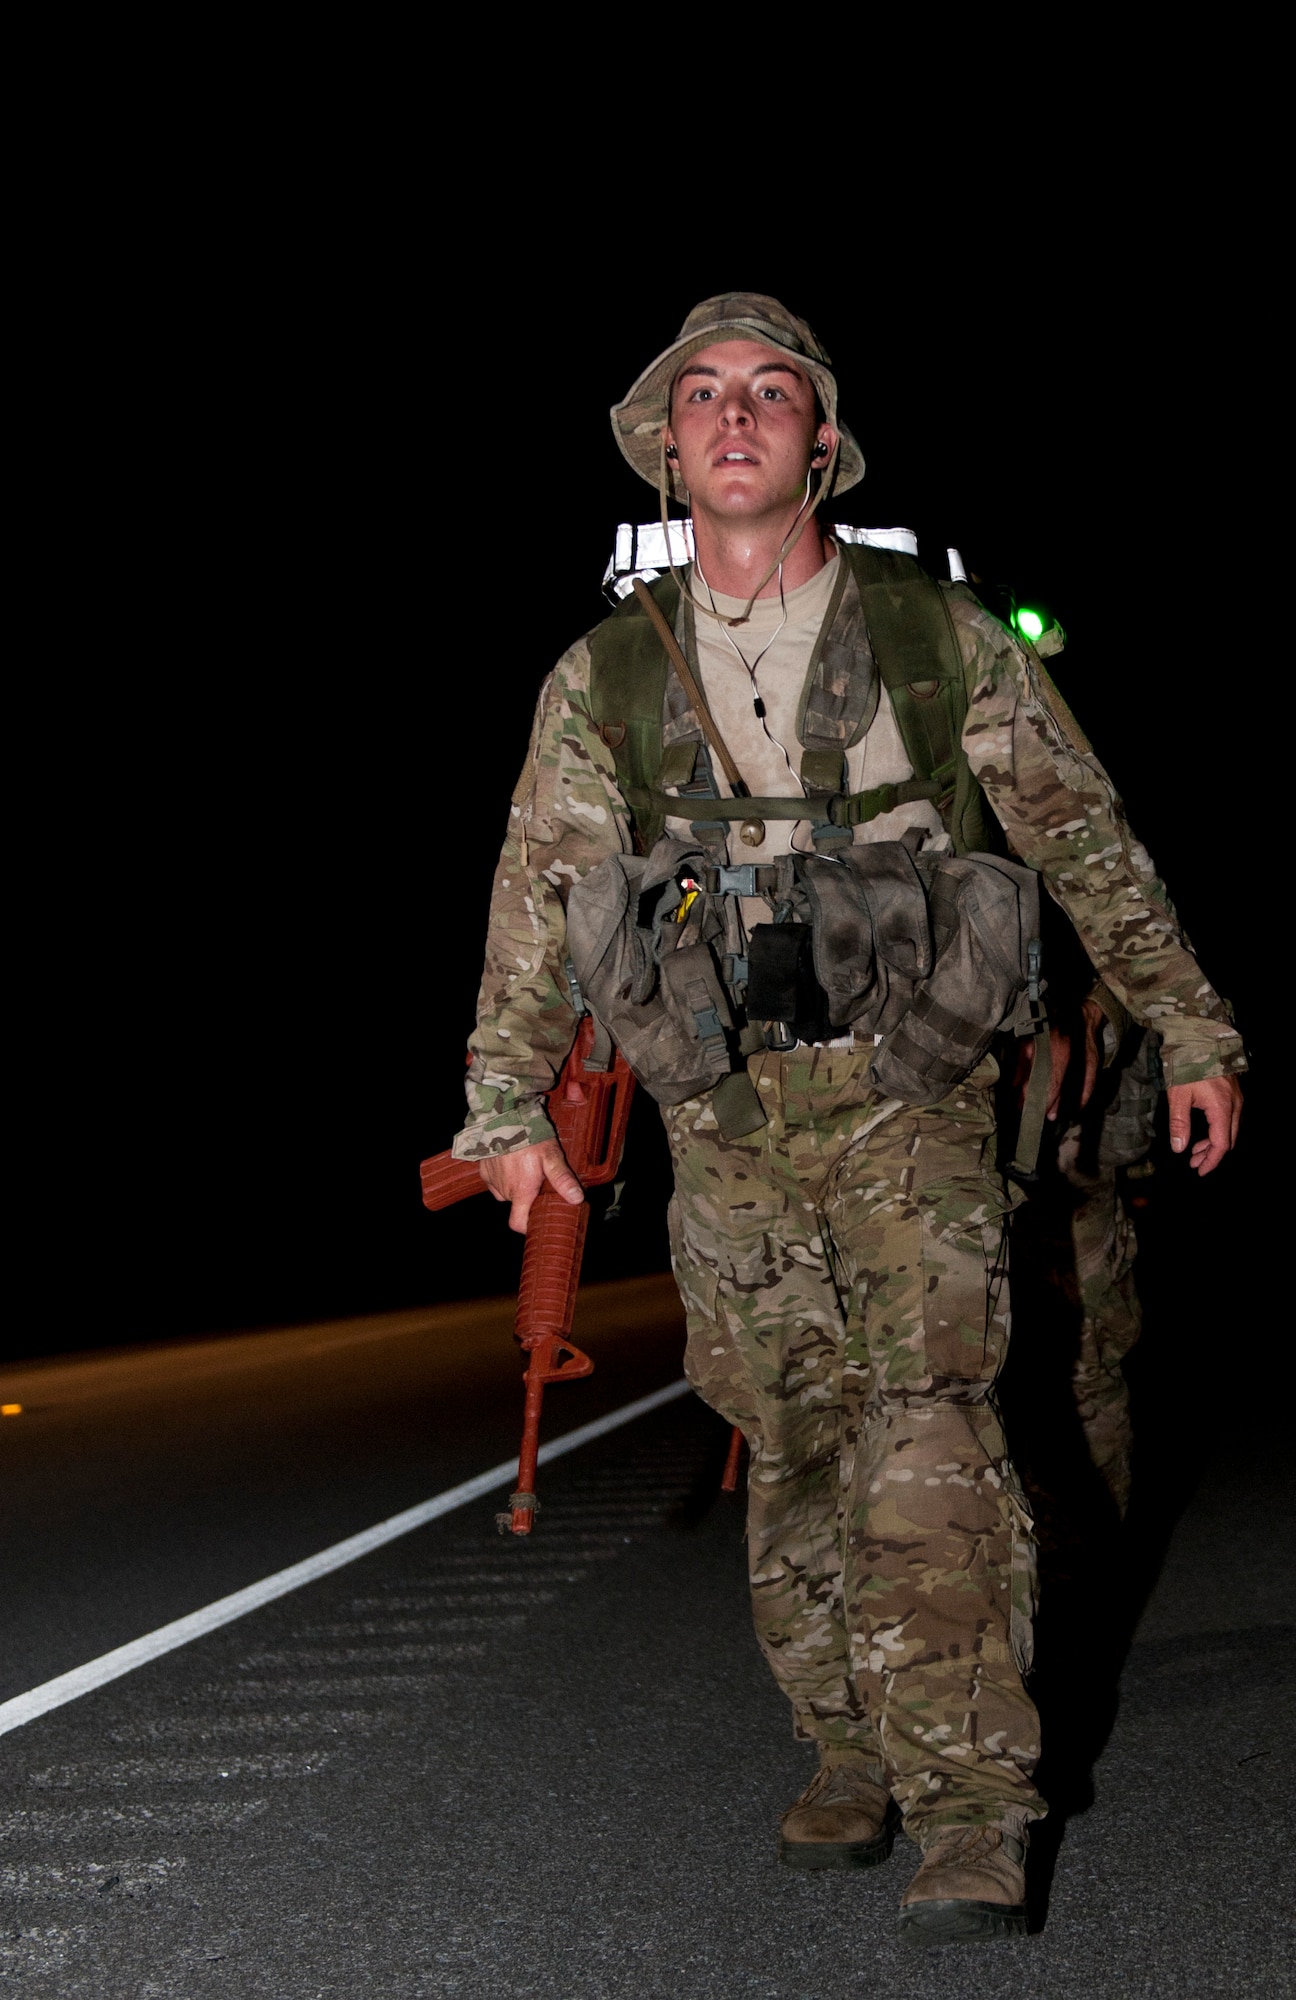 A Special Tactics candidate paces himself during a 12-mile ruck march in Fort Walton Beach, Fla., Sept. 13, 2013. The Special Tactics candidates had four hours to complete the ruck march, which is one of the final tests they must pass before graduating technical school. (U.S. Air Force photo/Senior Airman Krystal M. Garrett)